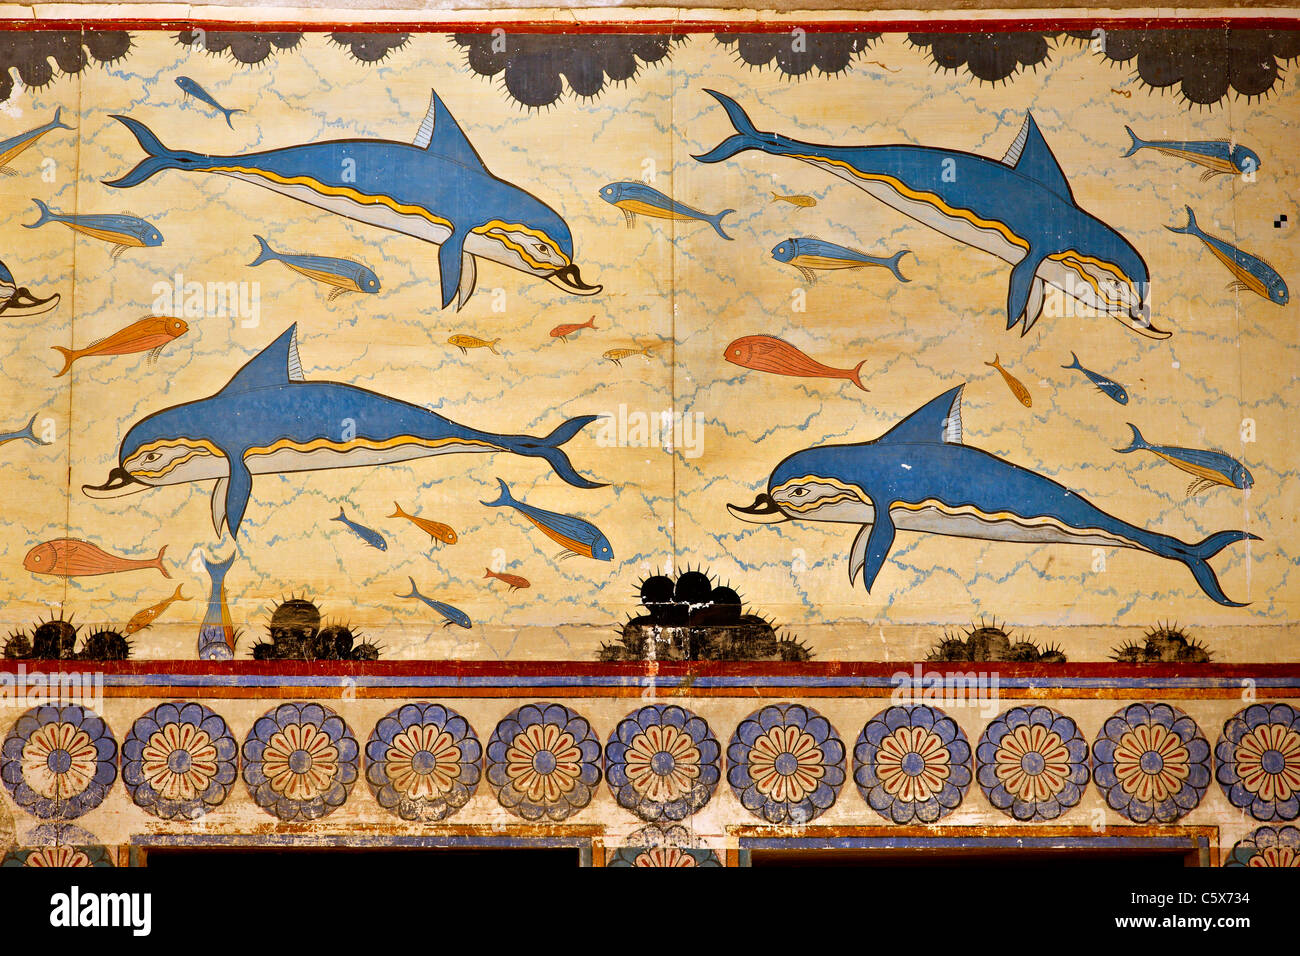 The Dolphins fresco from the Queen's Megaron at the Minoan palace of Knossos, Heraklion, Crete, Greece Stock Photo